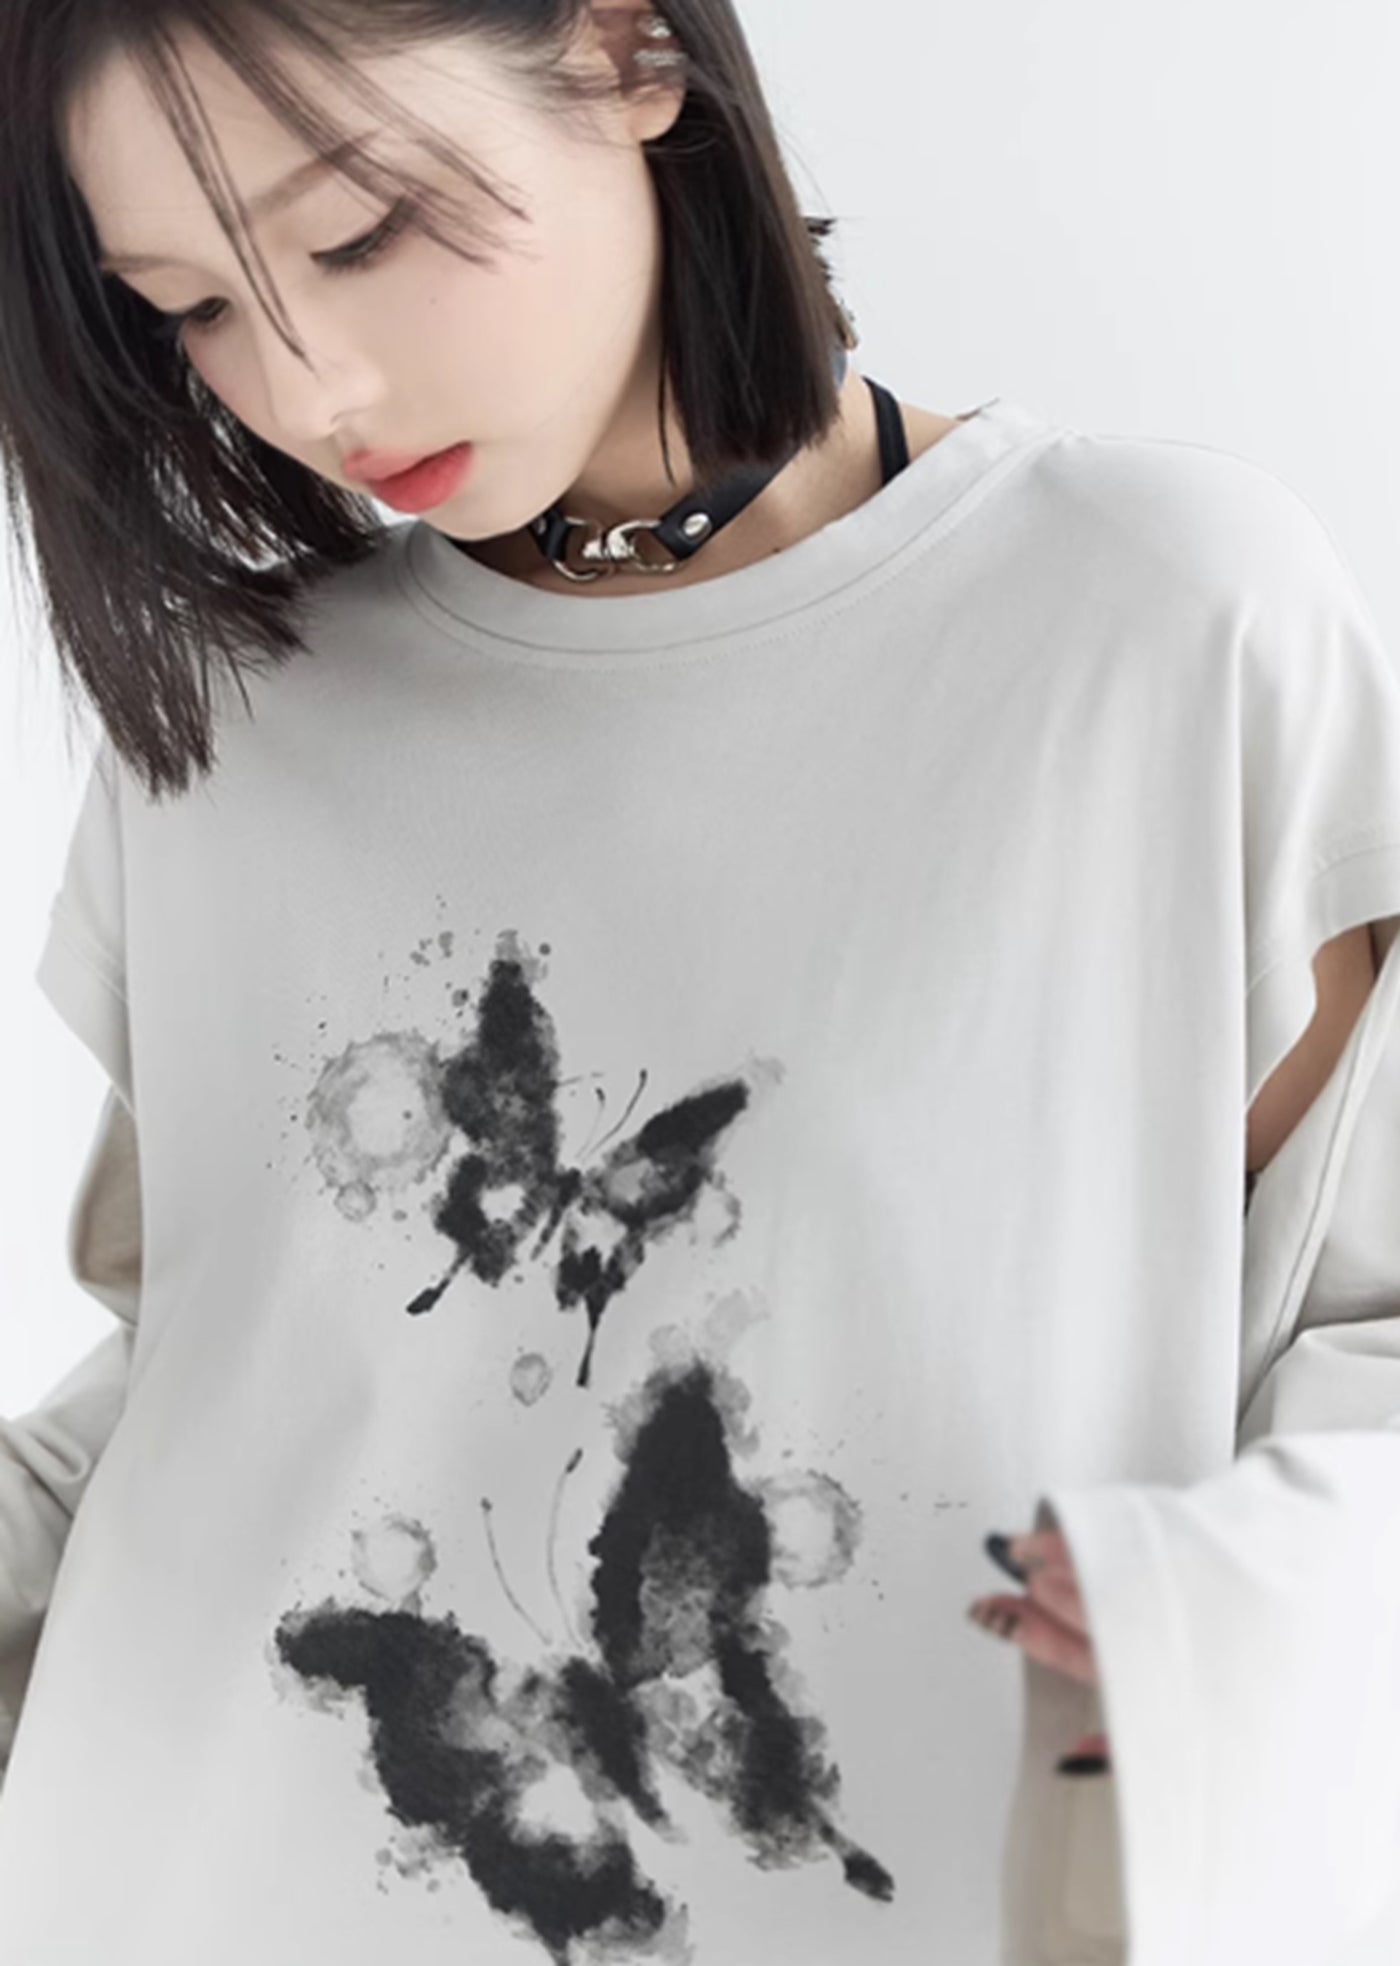 【Universal Gravity Museum】Two butterfly design simple monotone long sleeve T-shirt  UG0040